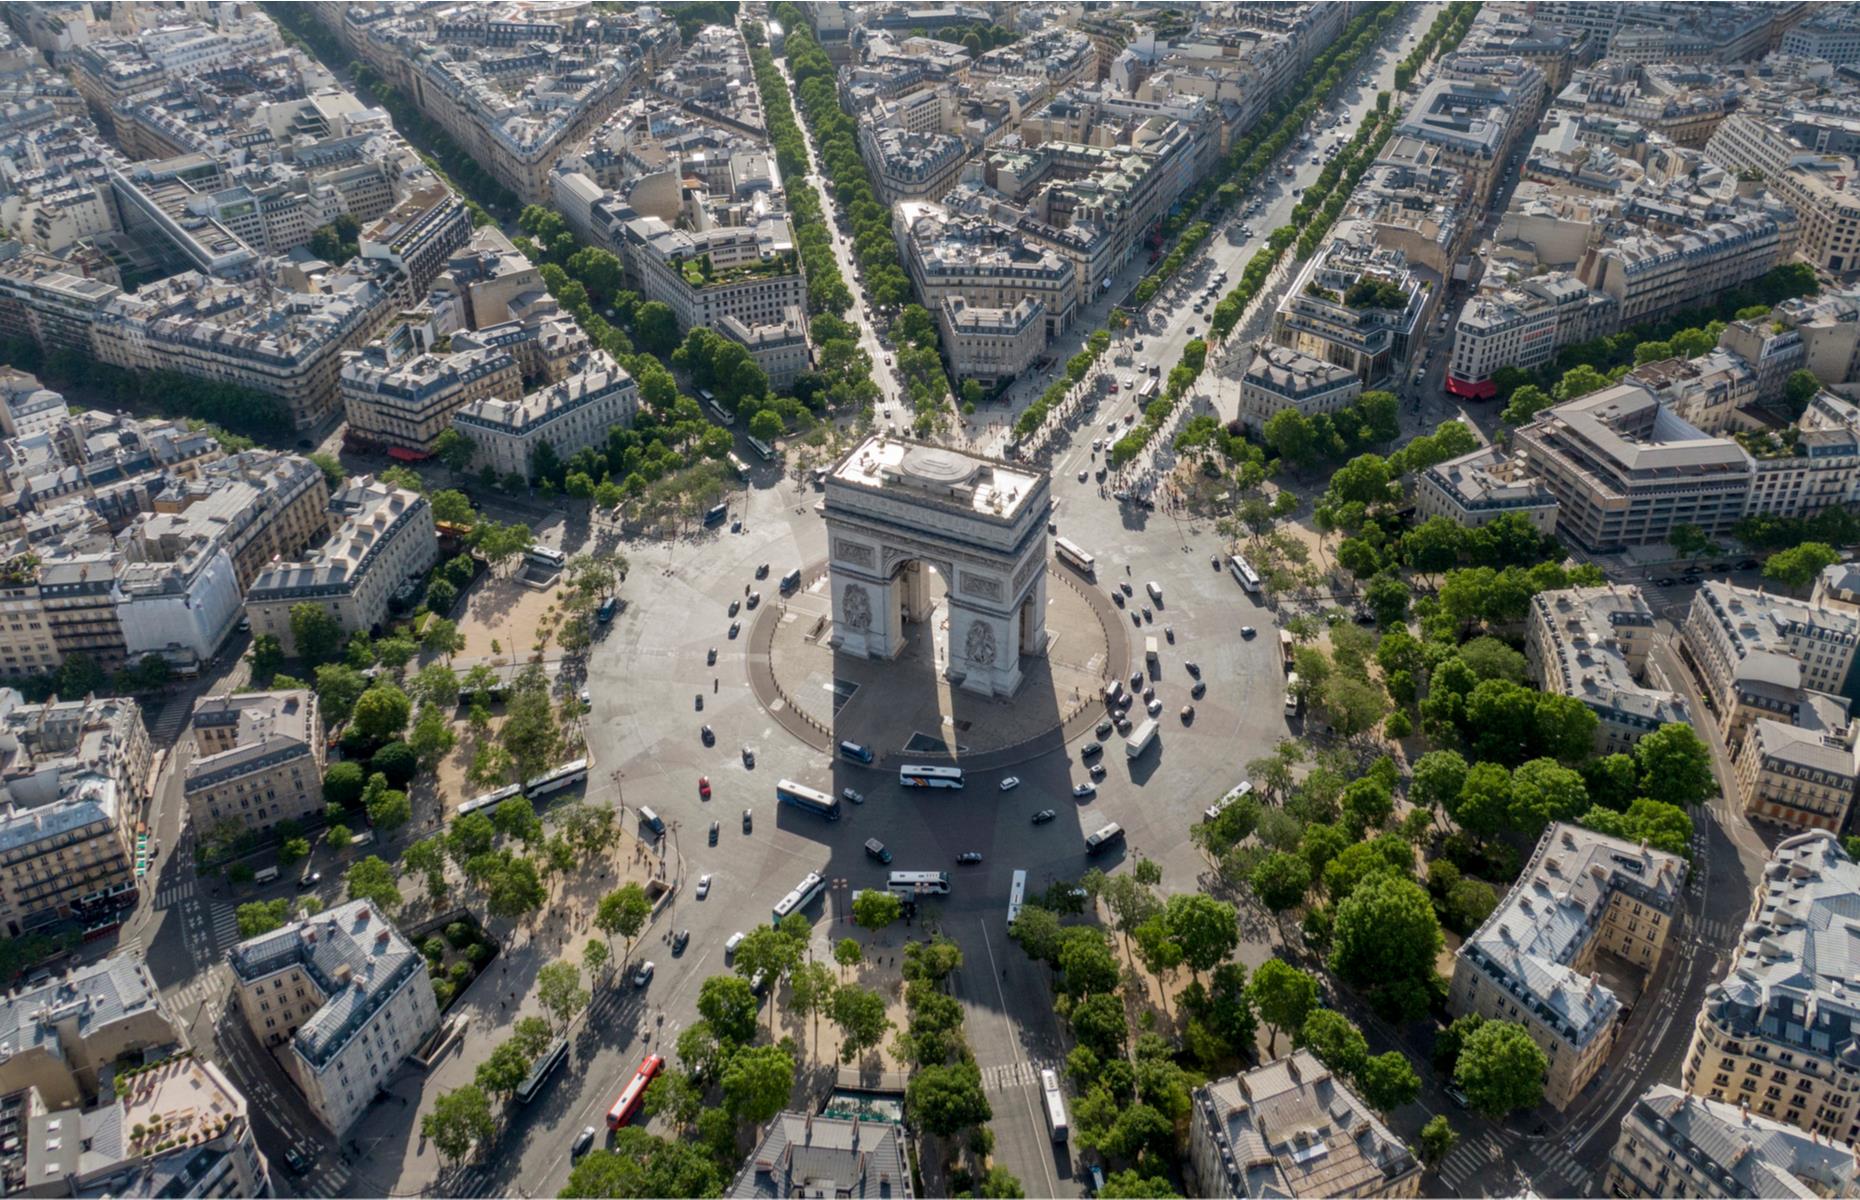 <p>Many tourists clamber up the 284 steps of the Arc de Triomphe to peer out at 360-degree views across Paris, but perhaps they’re missing a trick. The 19th-century arch itself looks pretty spectacular from the skies, sitting in the center of a circular plaza, the grand avenues radiating outwards from it to create a 12-pronged star. </p>  <p><strong><a href="https://www.loveexploring.com/galleries/81954/54-of-the-worlds-most-incredible-photos-from-above?page=1">Loved this? See our incredible planet photographed from above too</a></strong></p>